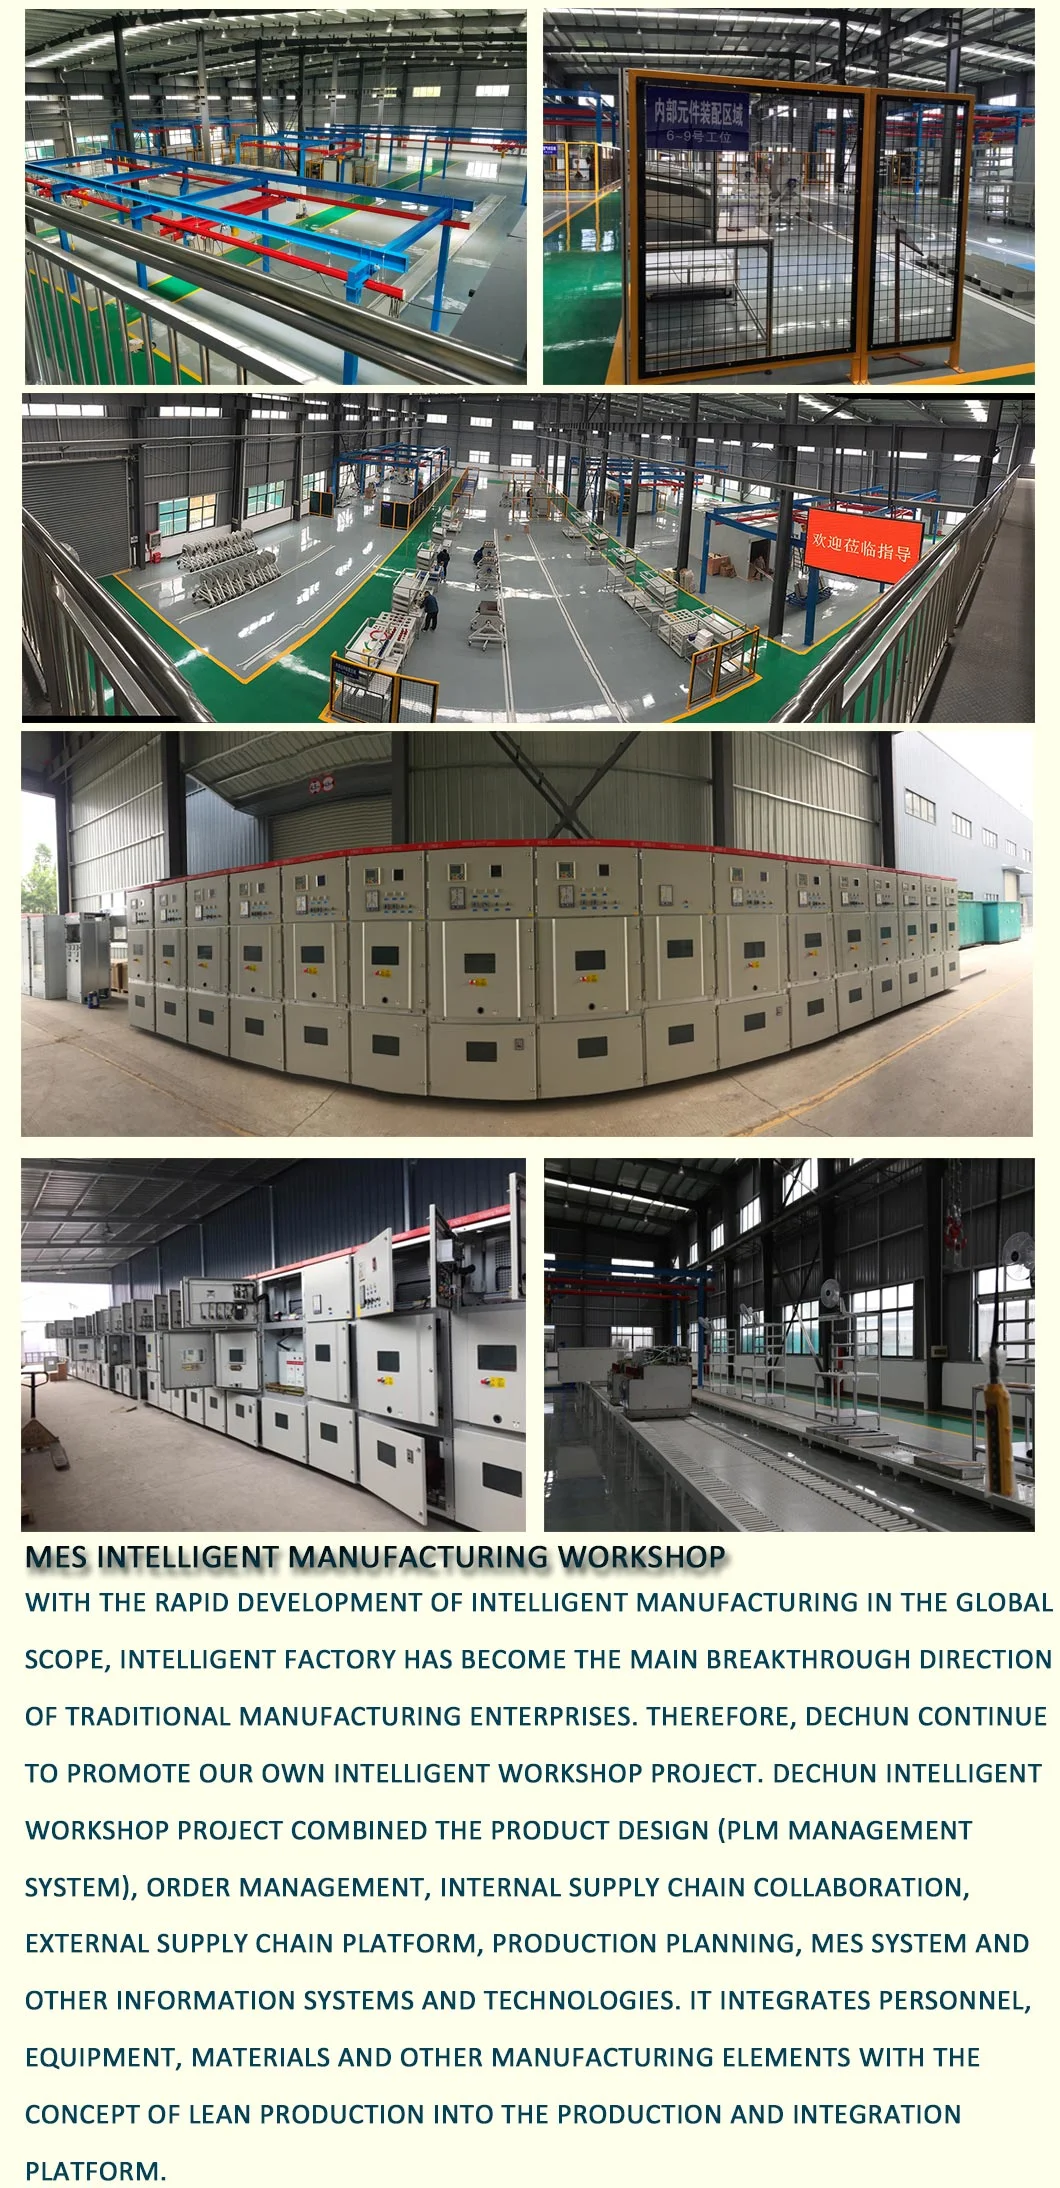 Sf6 Fully Gas Insulated Compact Electric Switchgear (GIS) Ring Main Unit (RMU) for Medium Voltage for Midget Plant